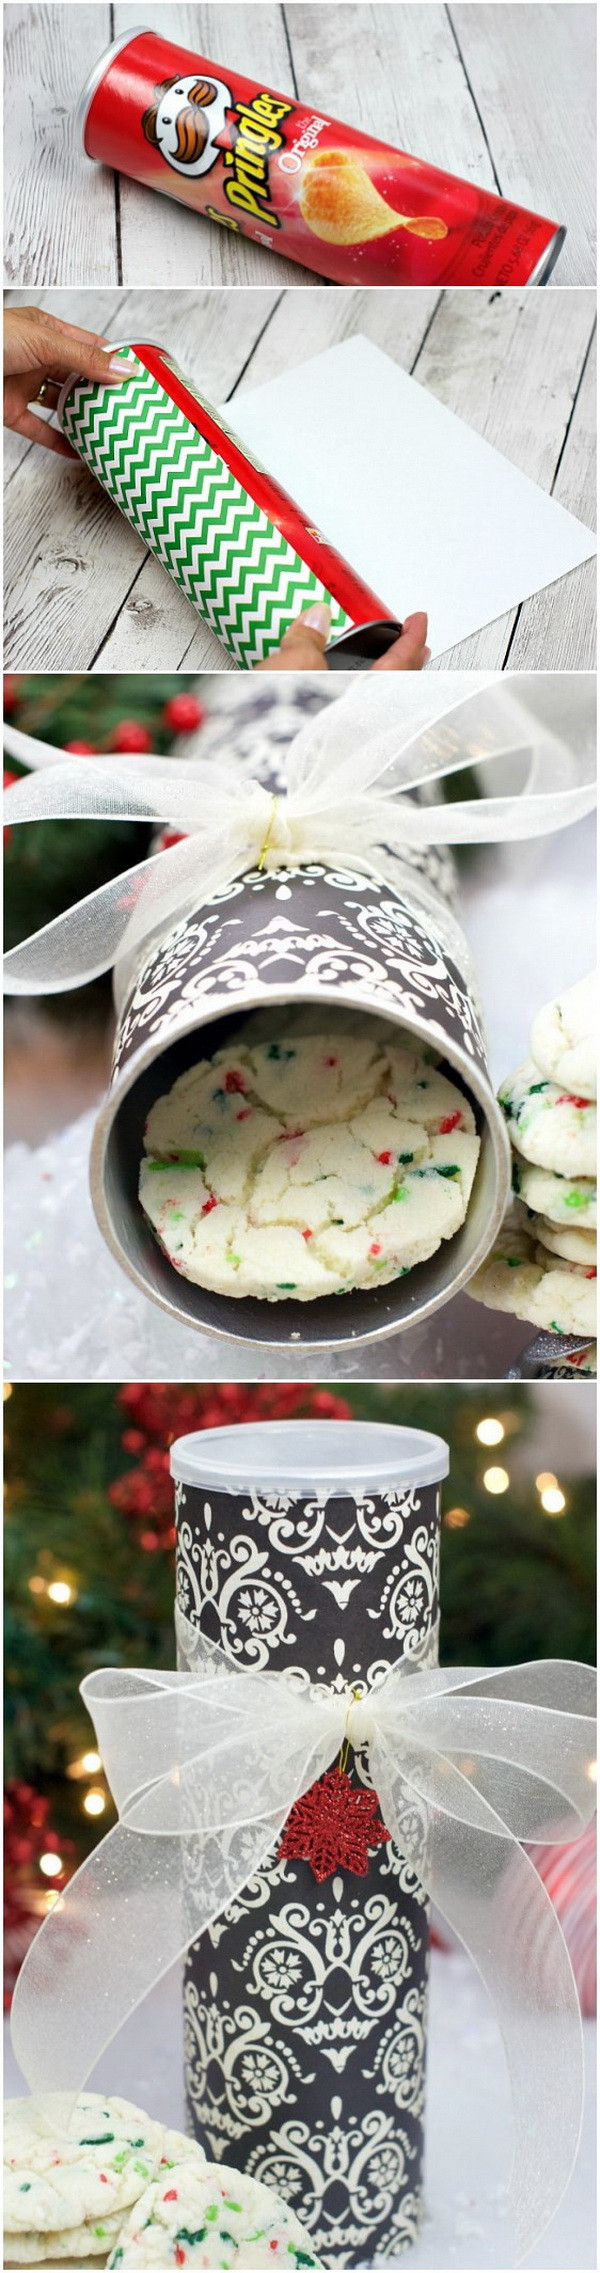 DIY Christmas Present Ideas
 30 Homemade Christmas Gifts Everyone will Love For